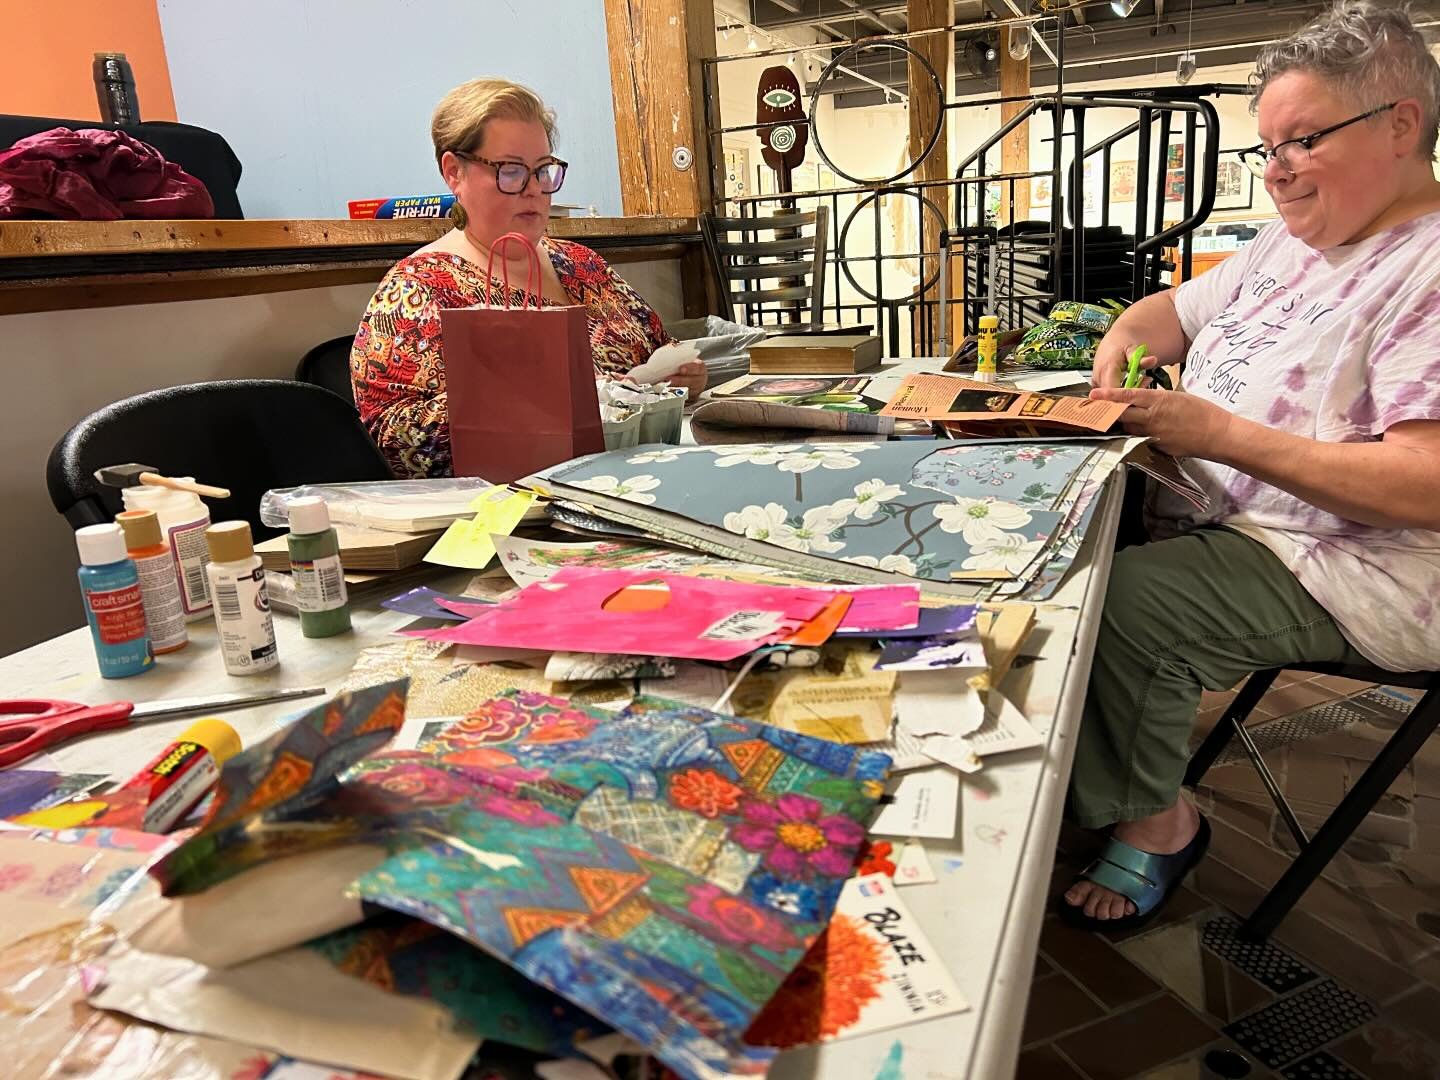 Cutting and pasting in honor of World Collage Day with @carolfettin @collage_nebraska and @jenniferlentfer at @hotshopsartcenter until 4pm. Thanks Kelly Adams, Doug Boyd, @cindibrusse and @shawnequa.linder for jumping in!